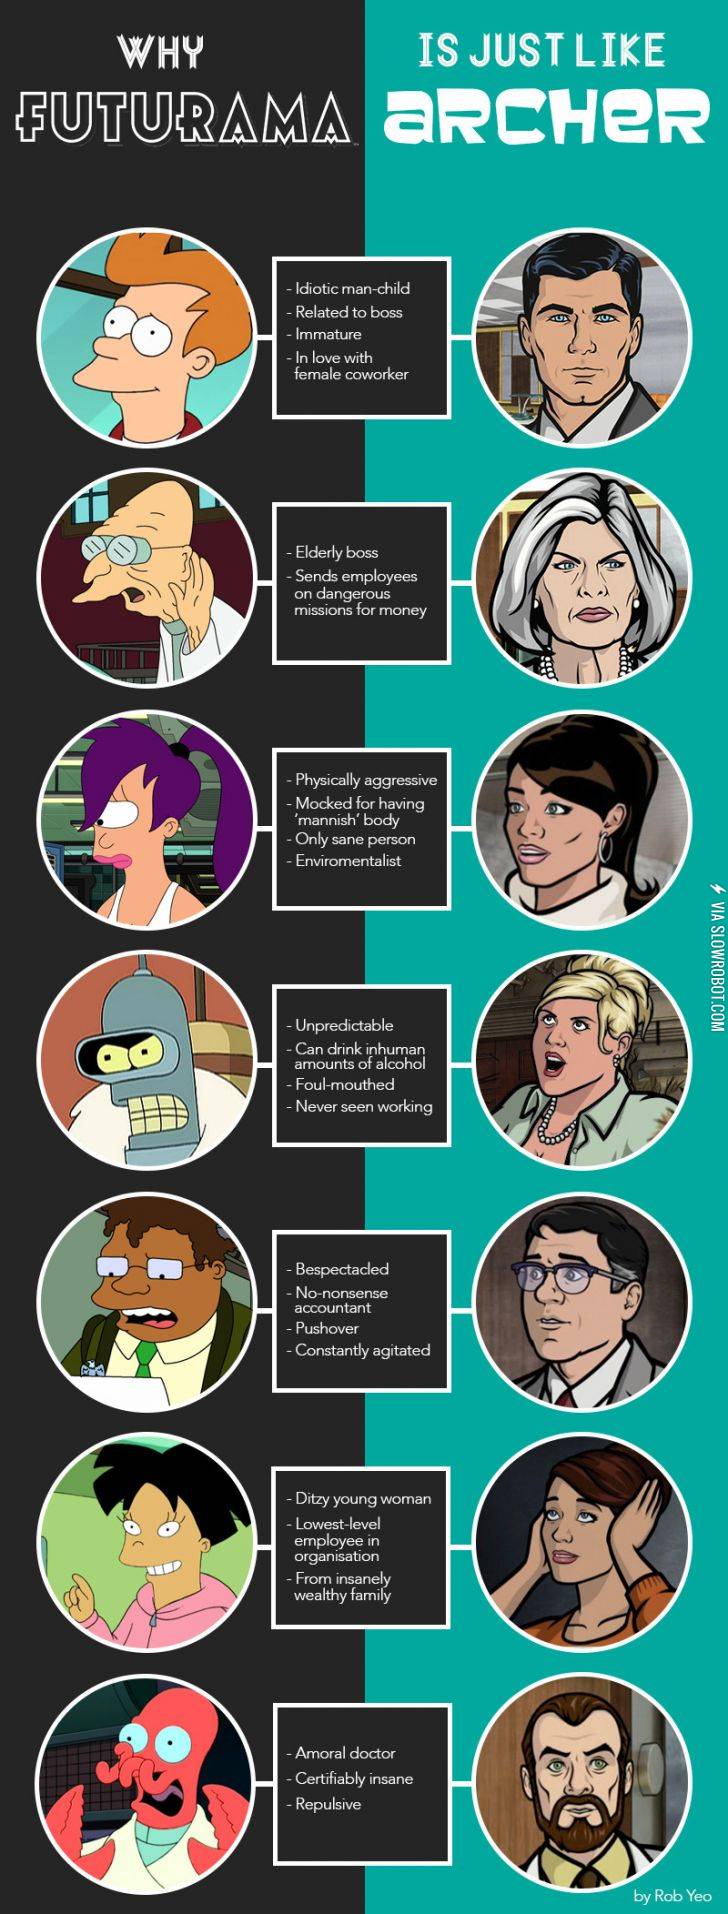 Why+Archer+is+just+like+Futurama